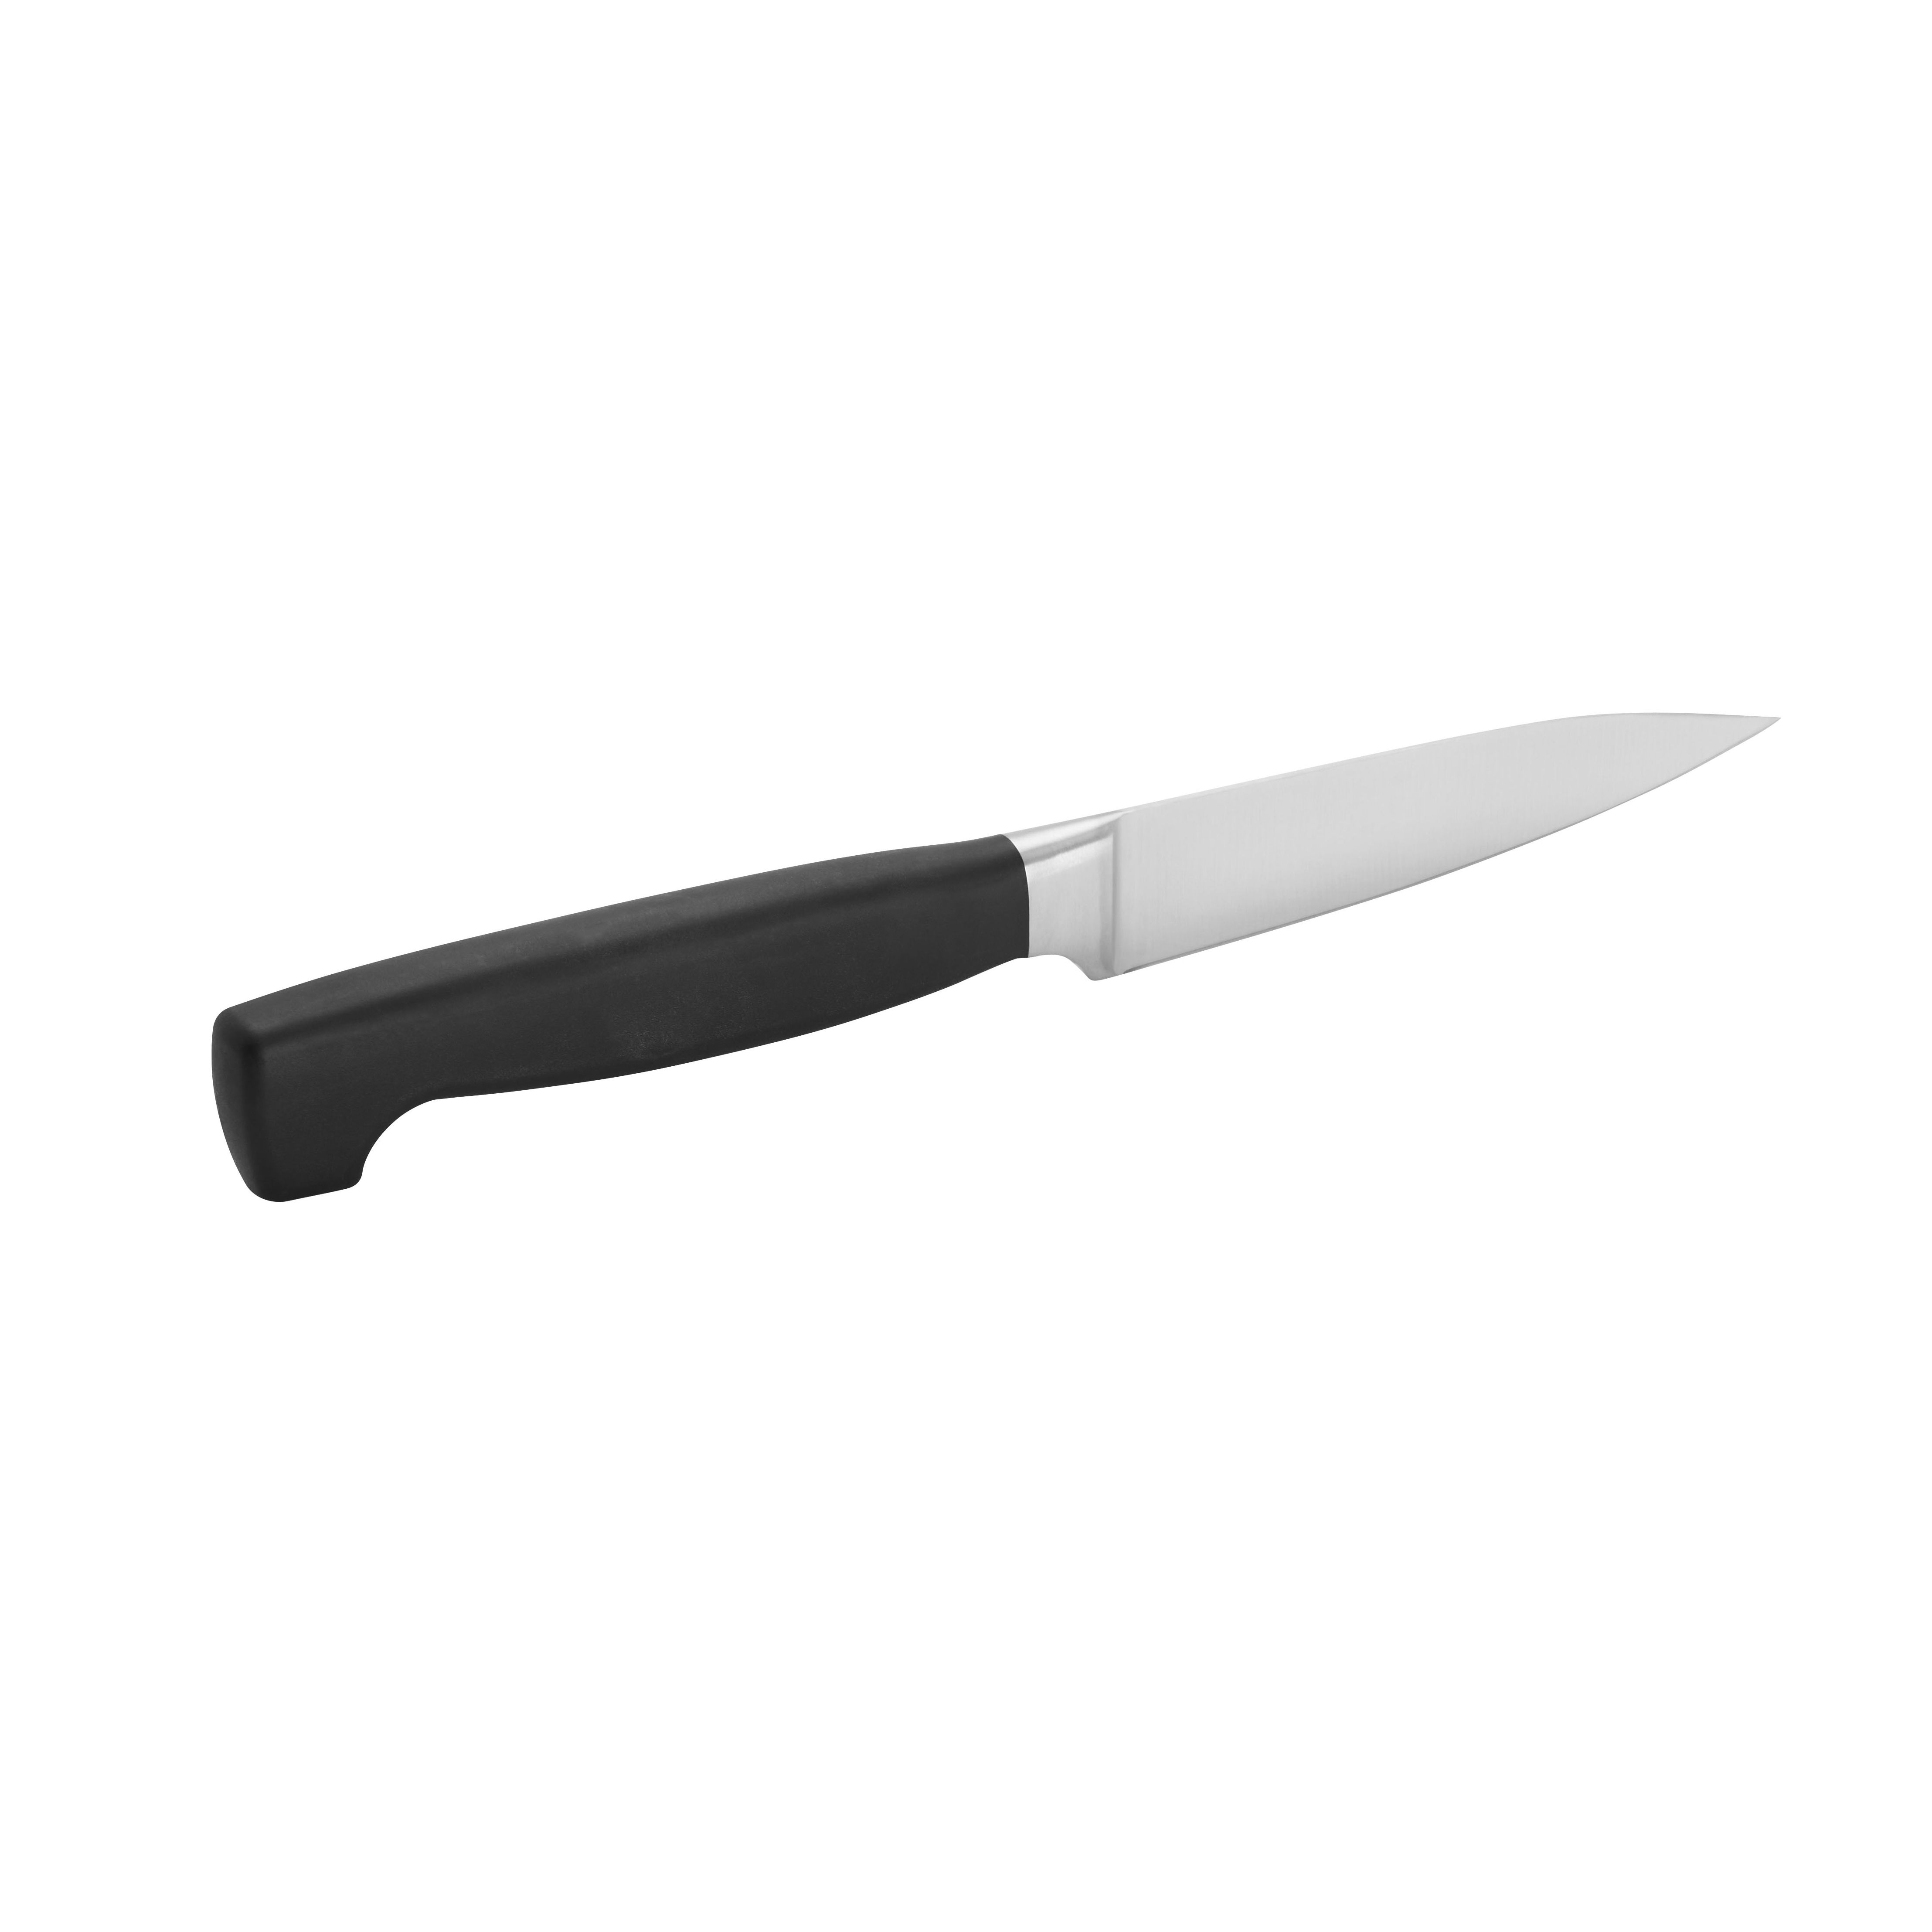 ZWILLING Four Star Paring Knife 10cm